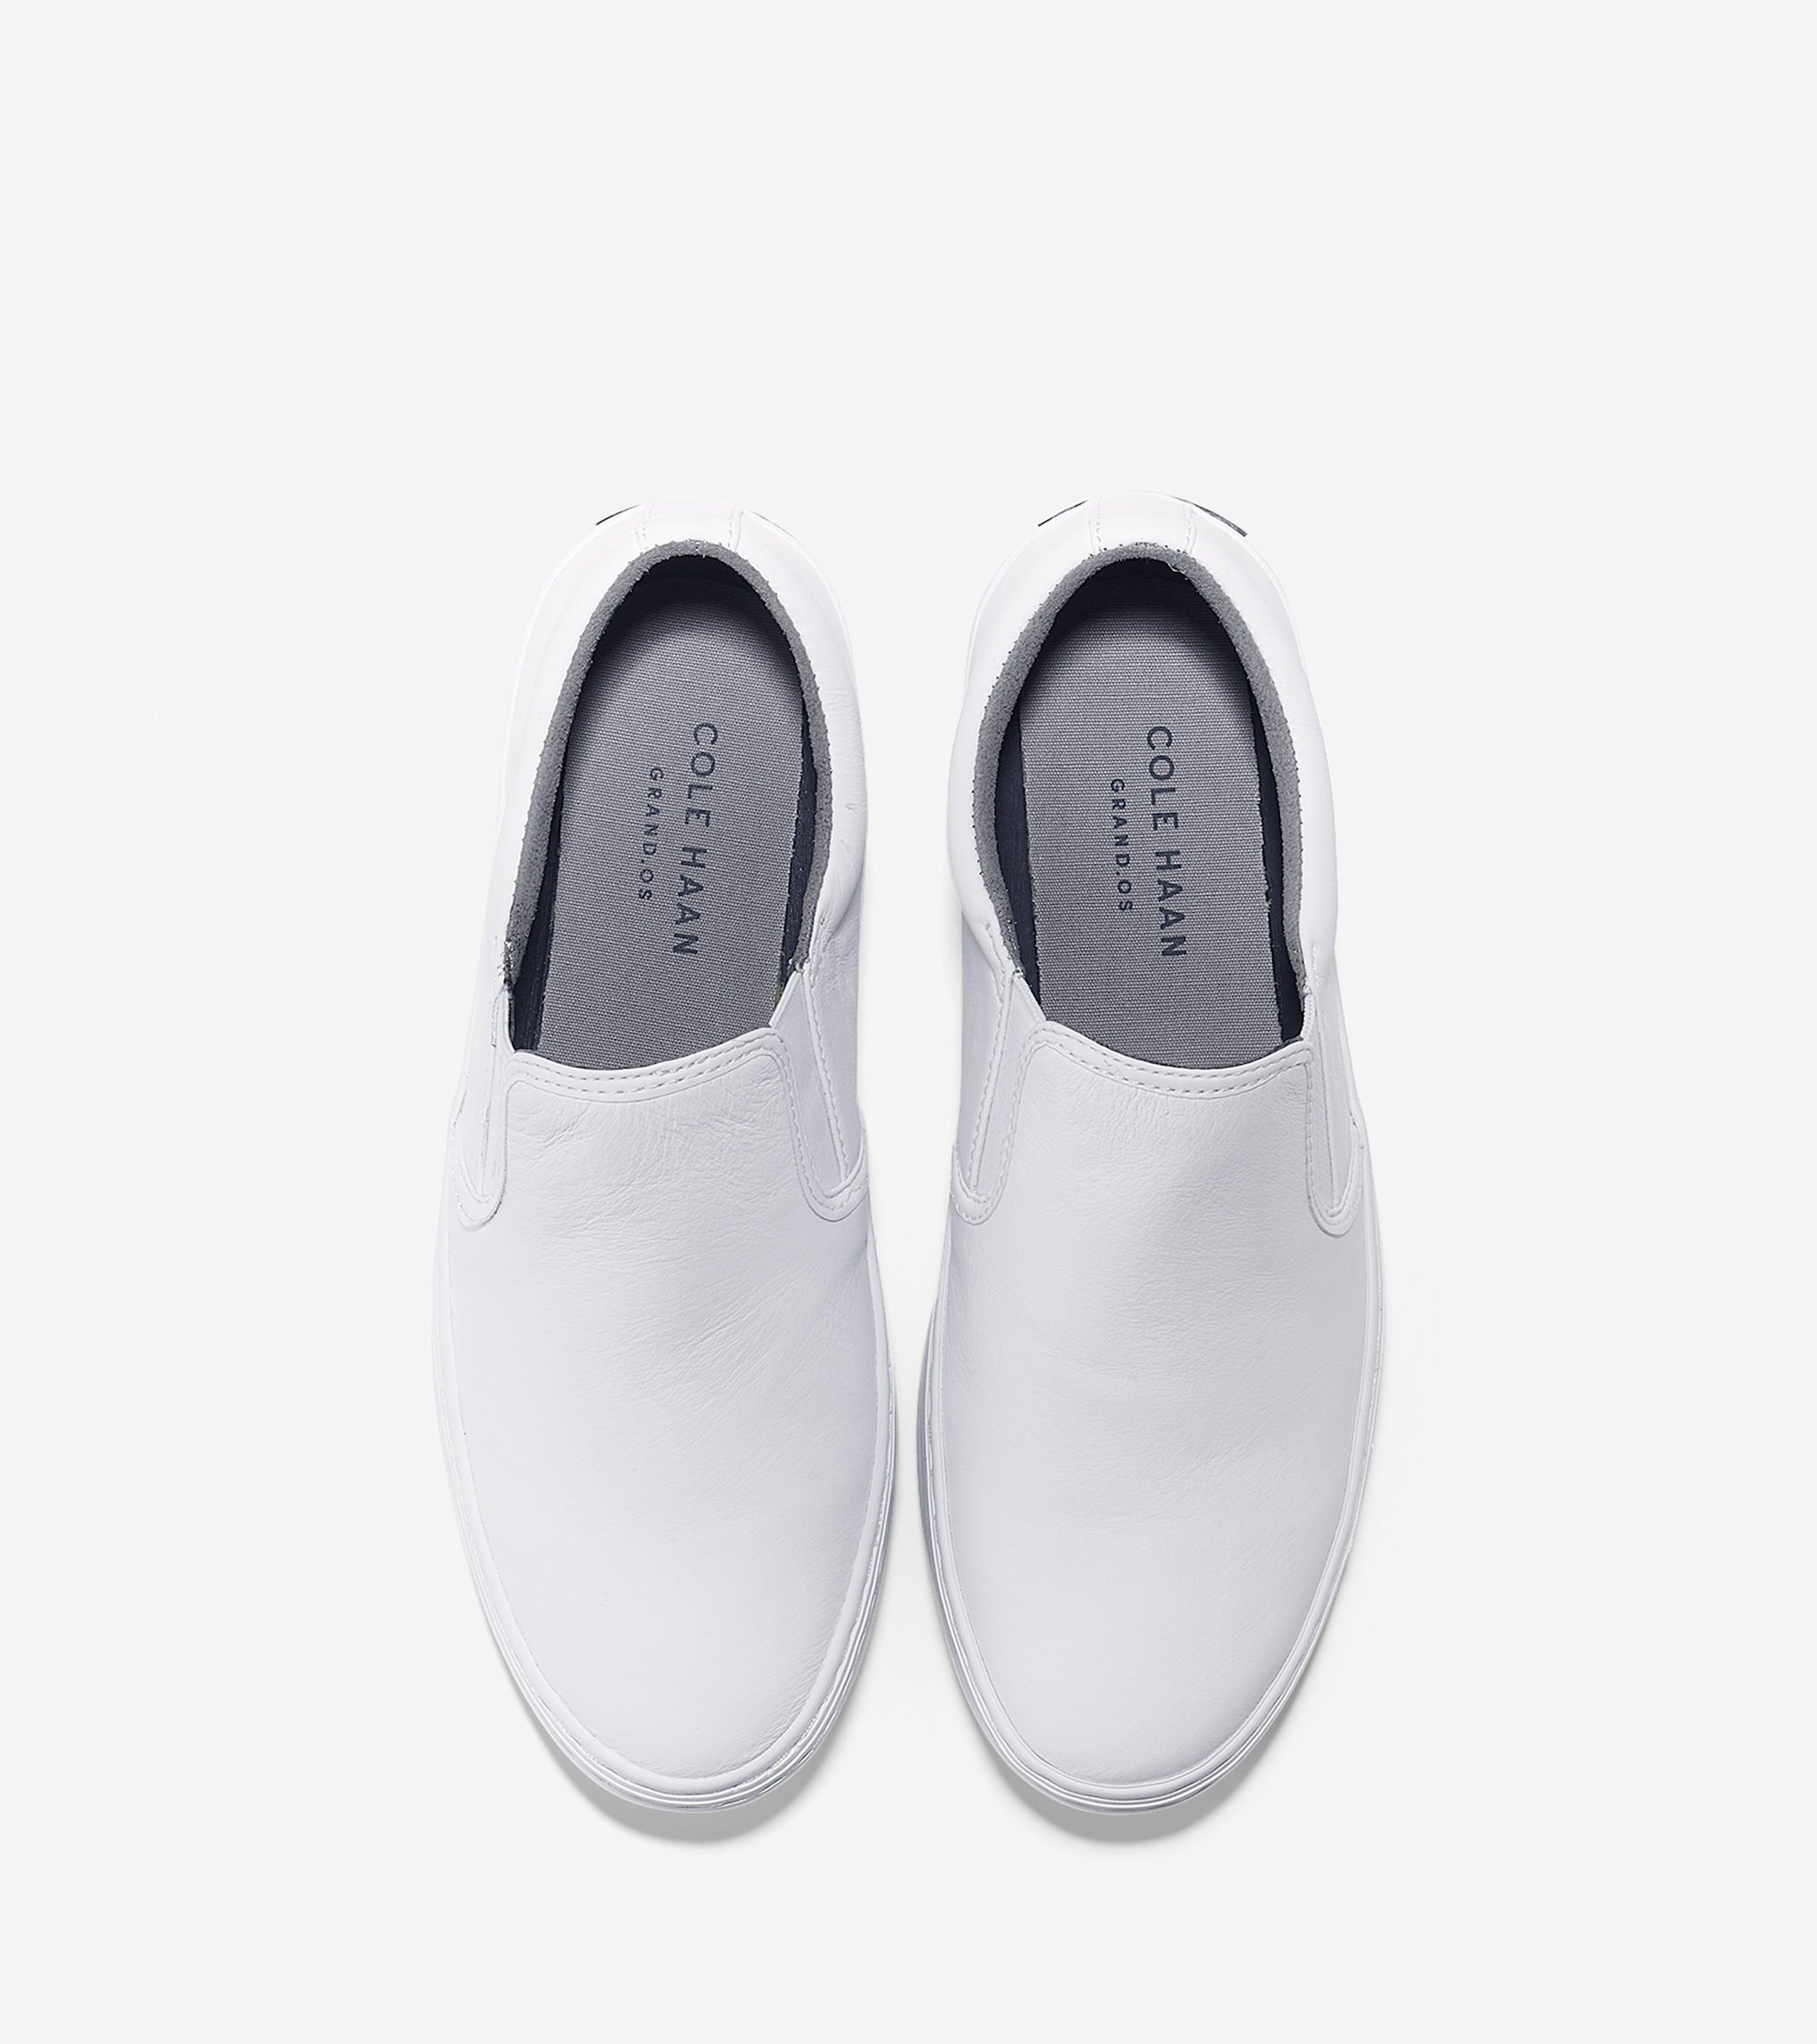 Cole Haan Leather Falmouth Slip-On Sneakers in White for Men - Lyst